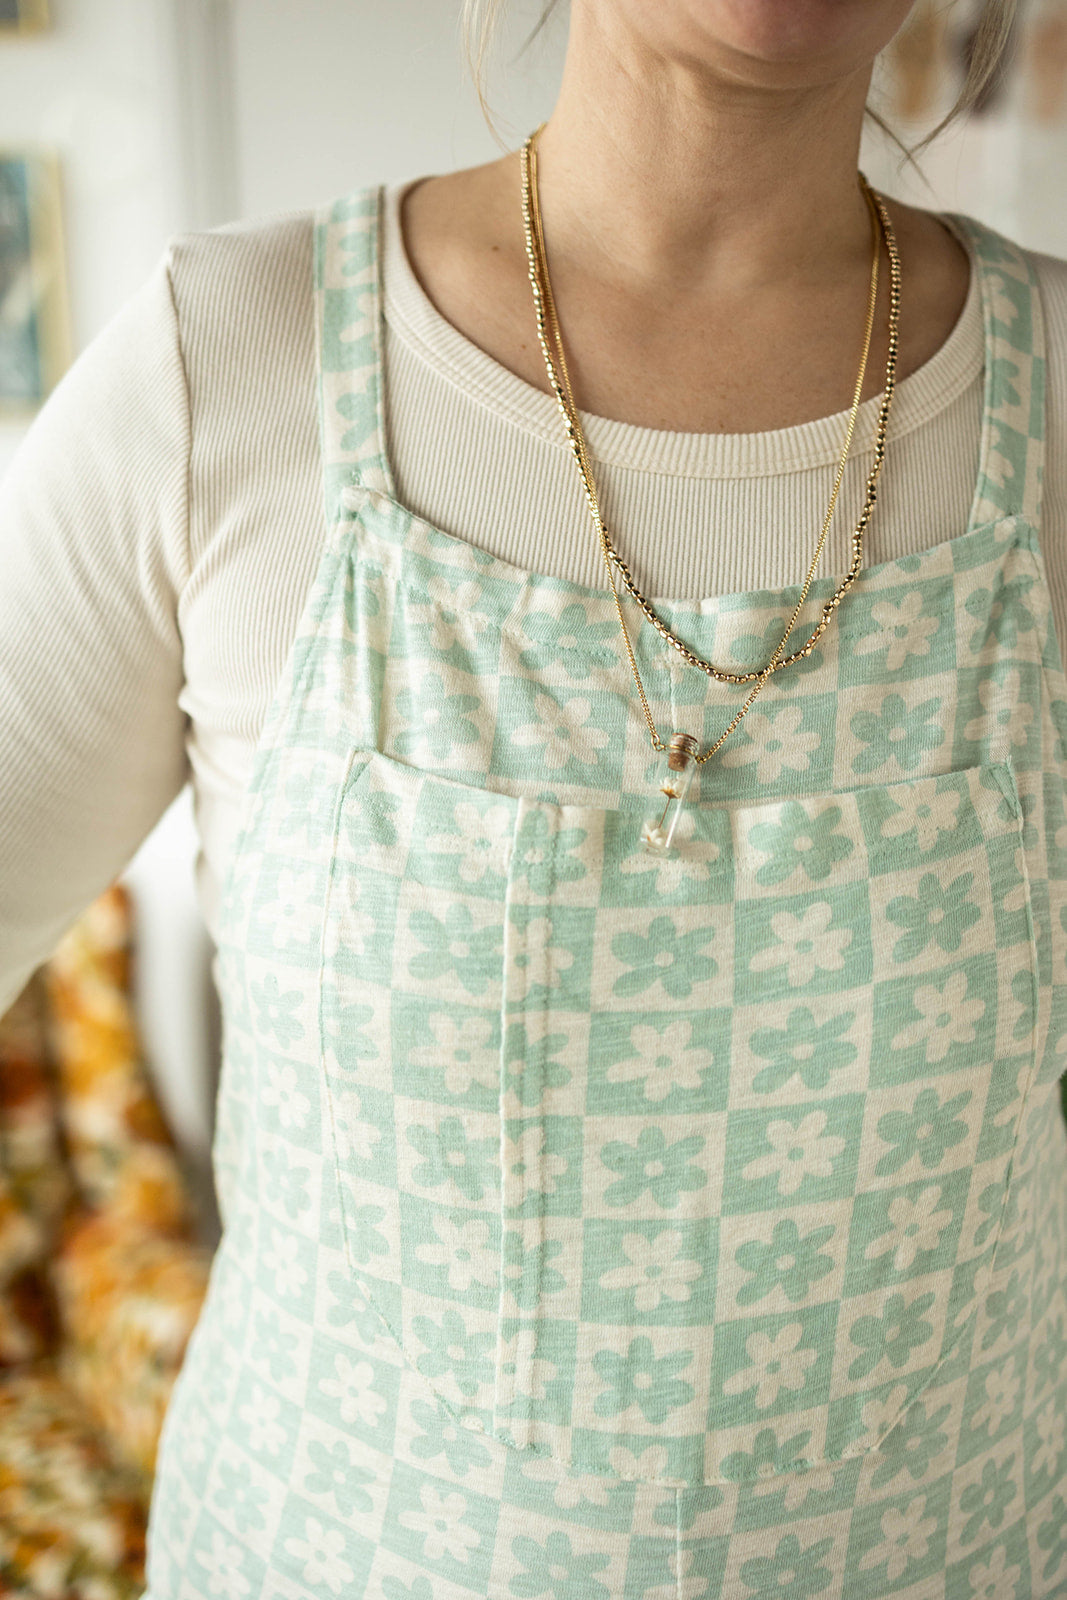 rhythm overall jumper in mint floral